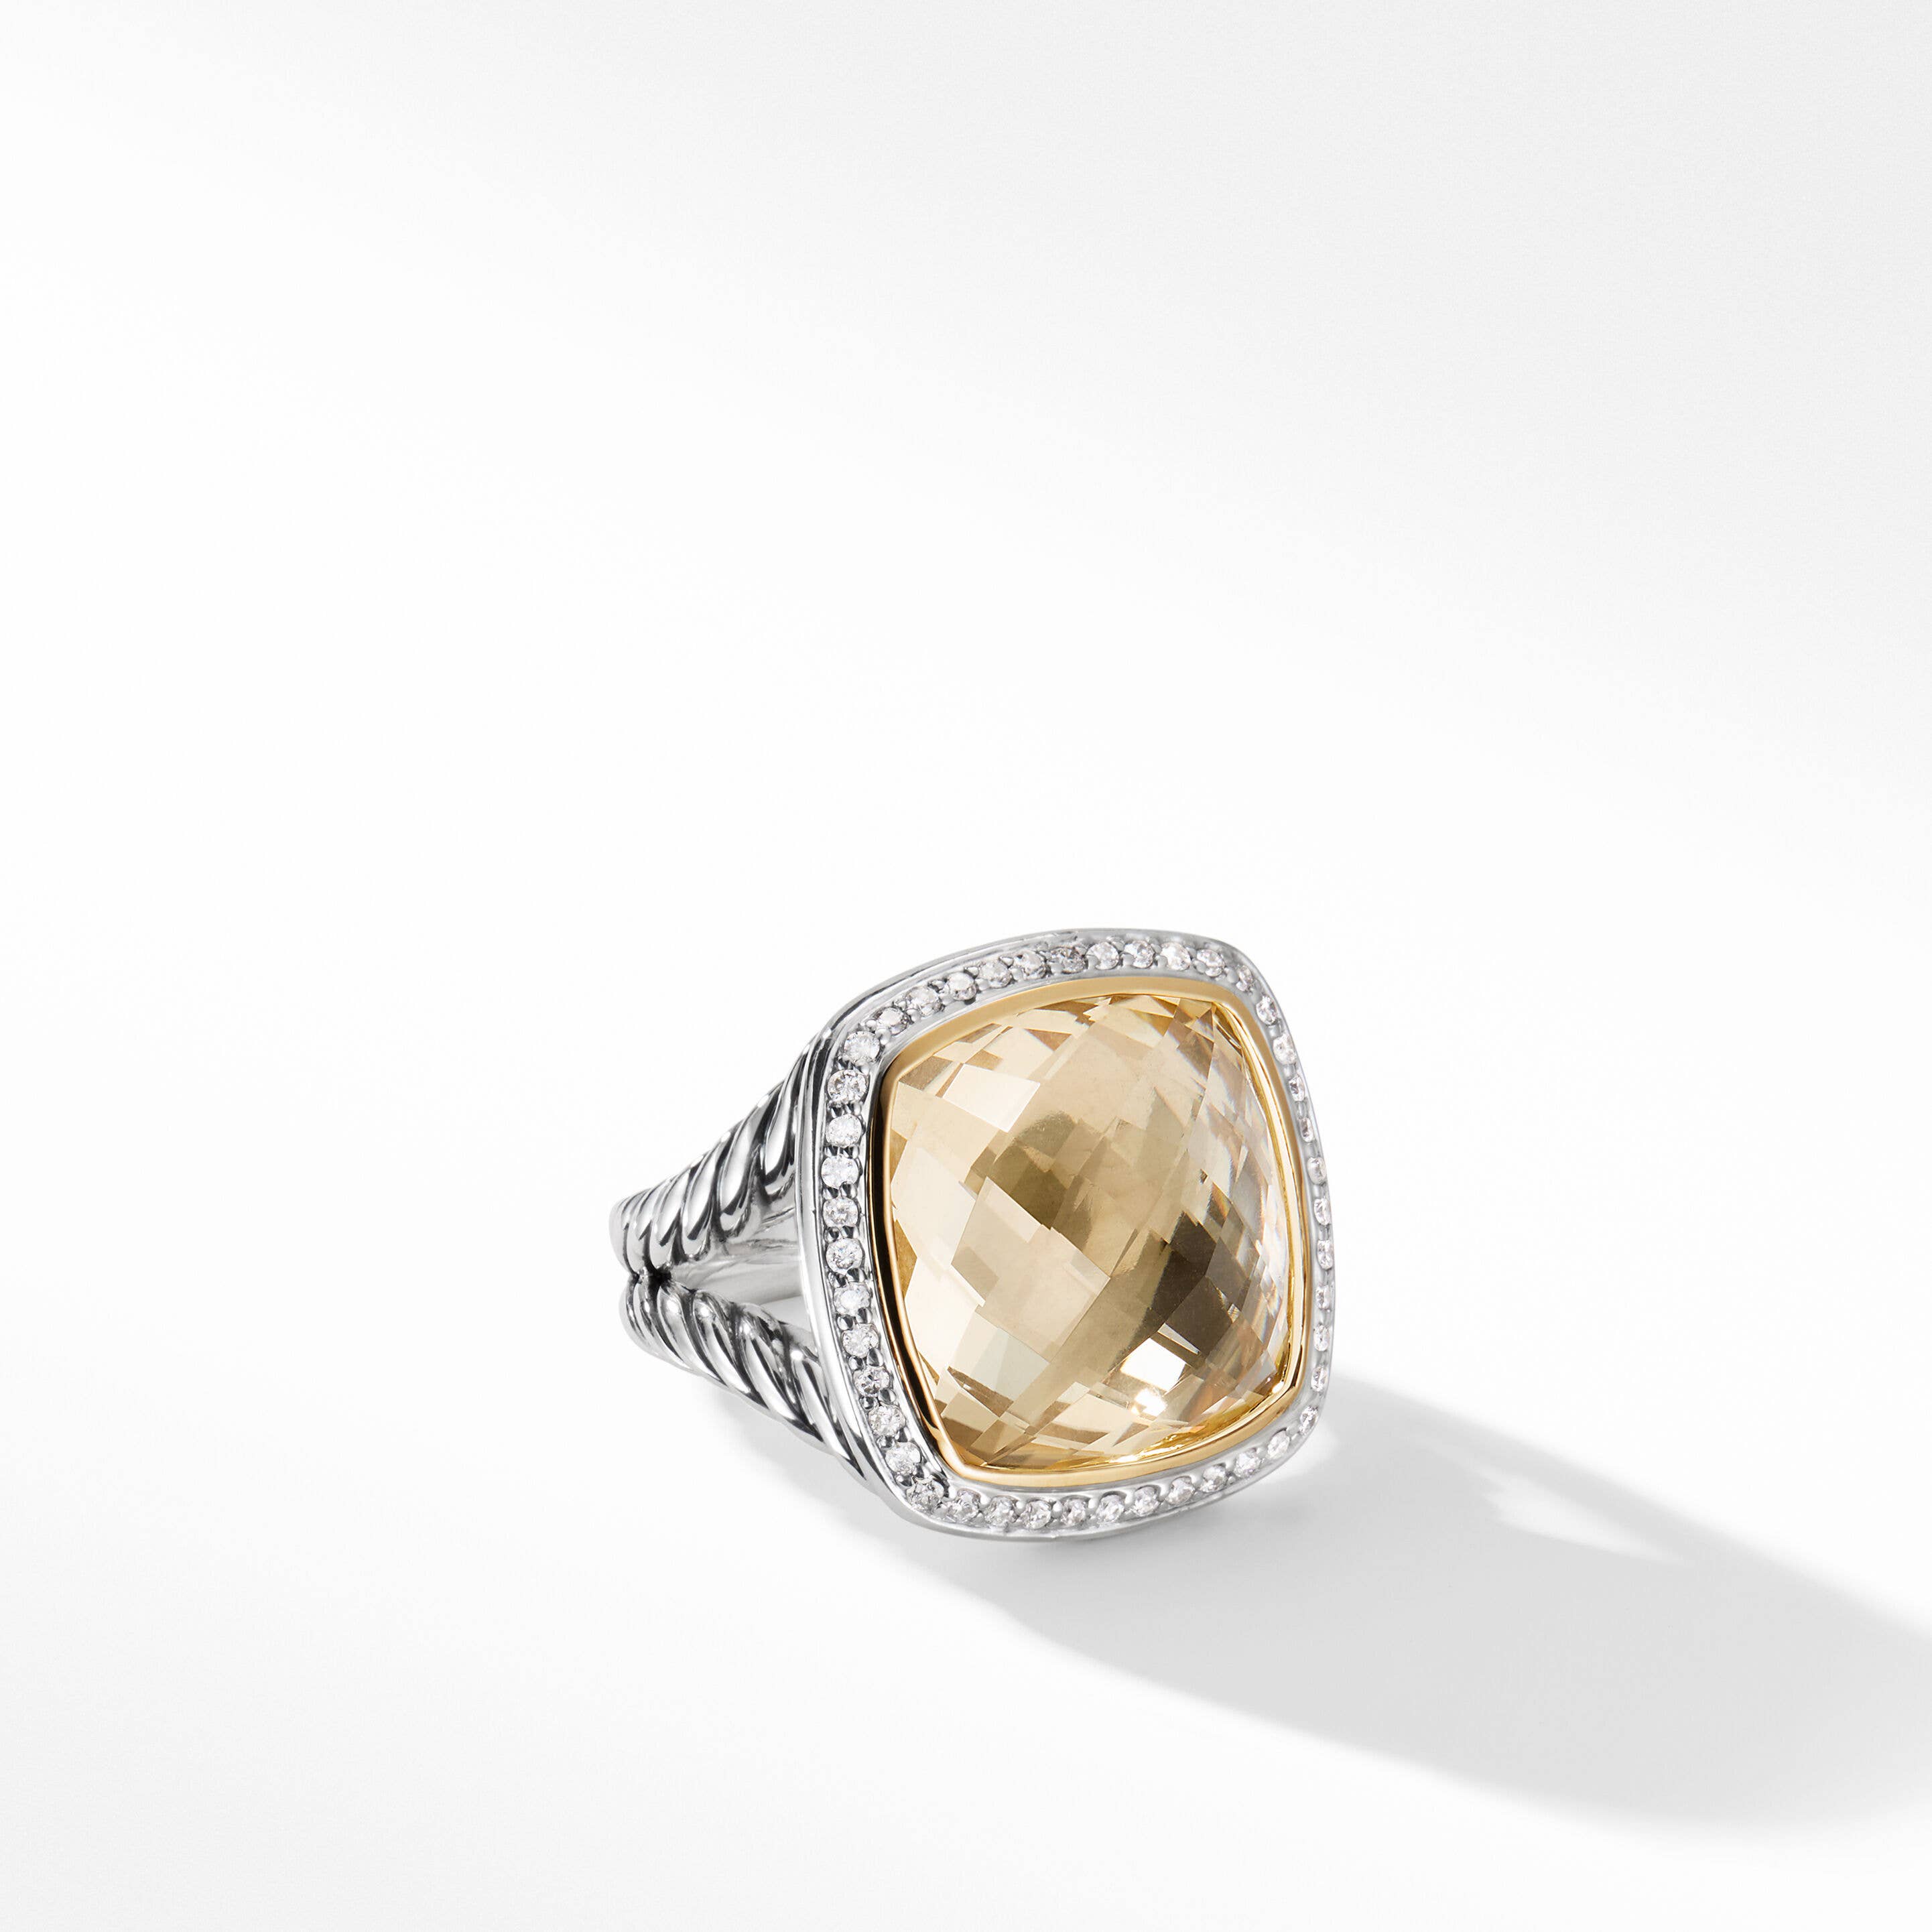 Albion® Ring with Champagne Citrine, Pavé Diamonds and 18K Yellow Gold